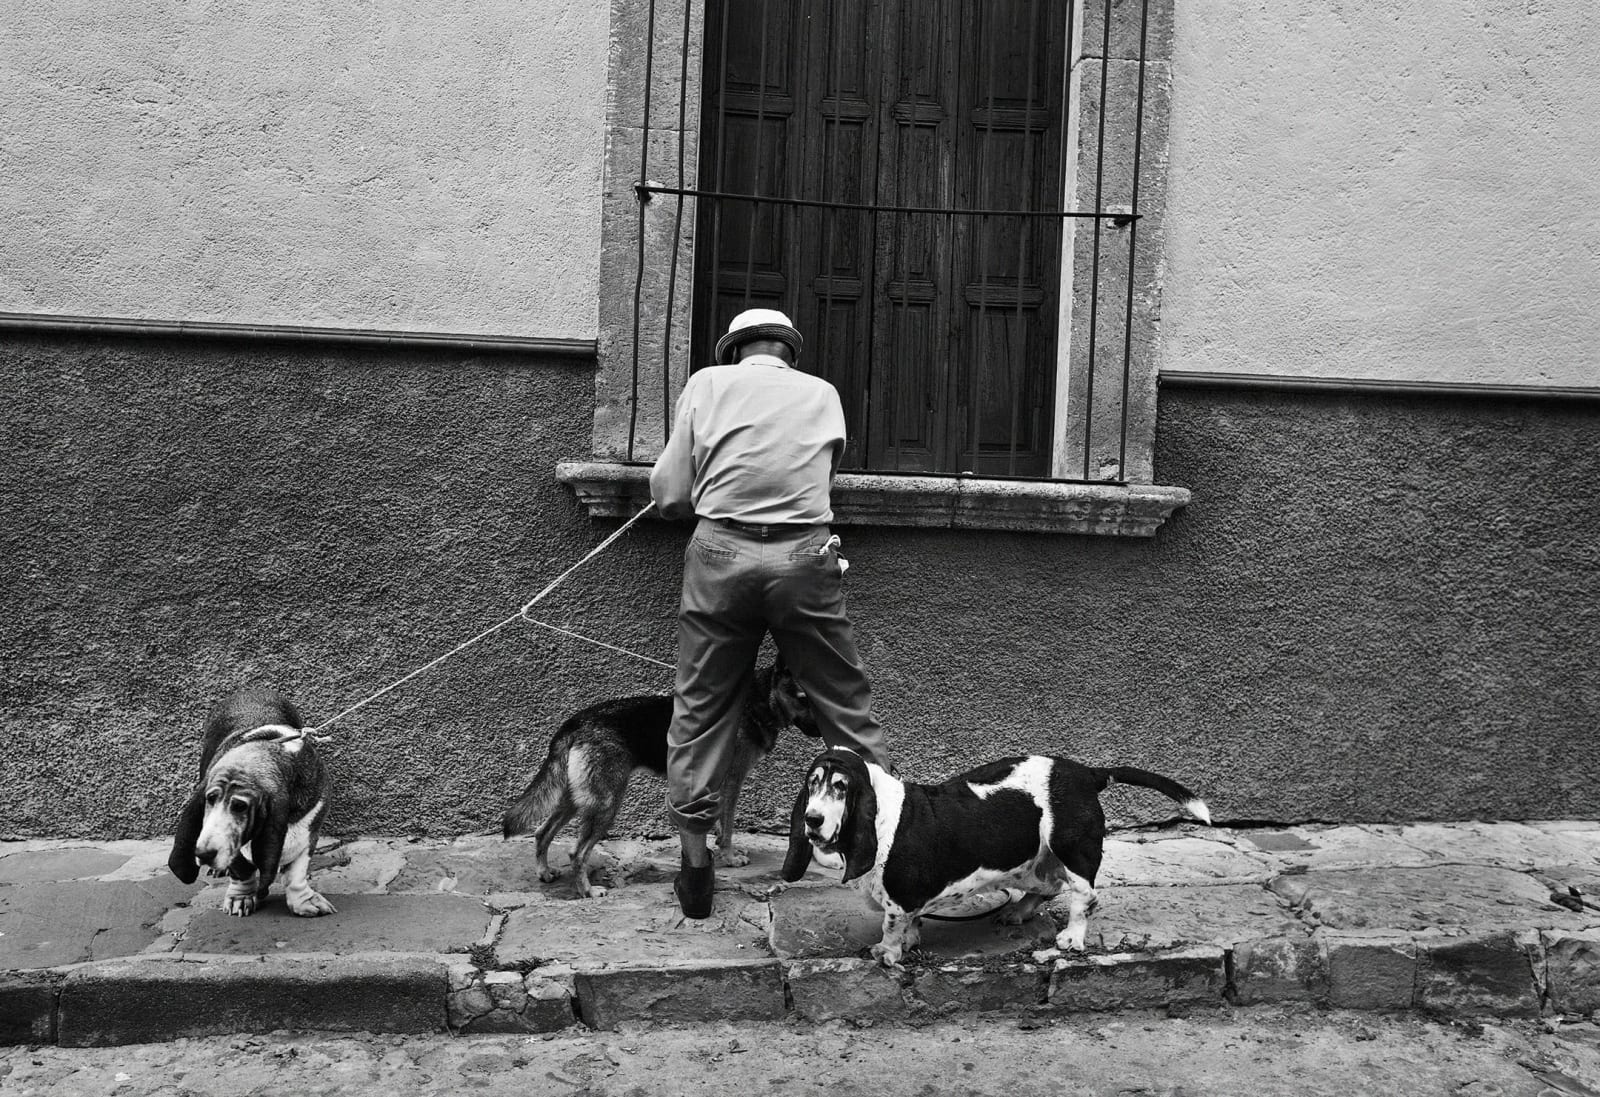 RUSSELL MONK, Calle Chiquitos, San Miguel Allende, 2010